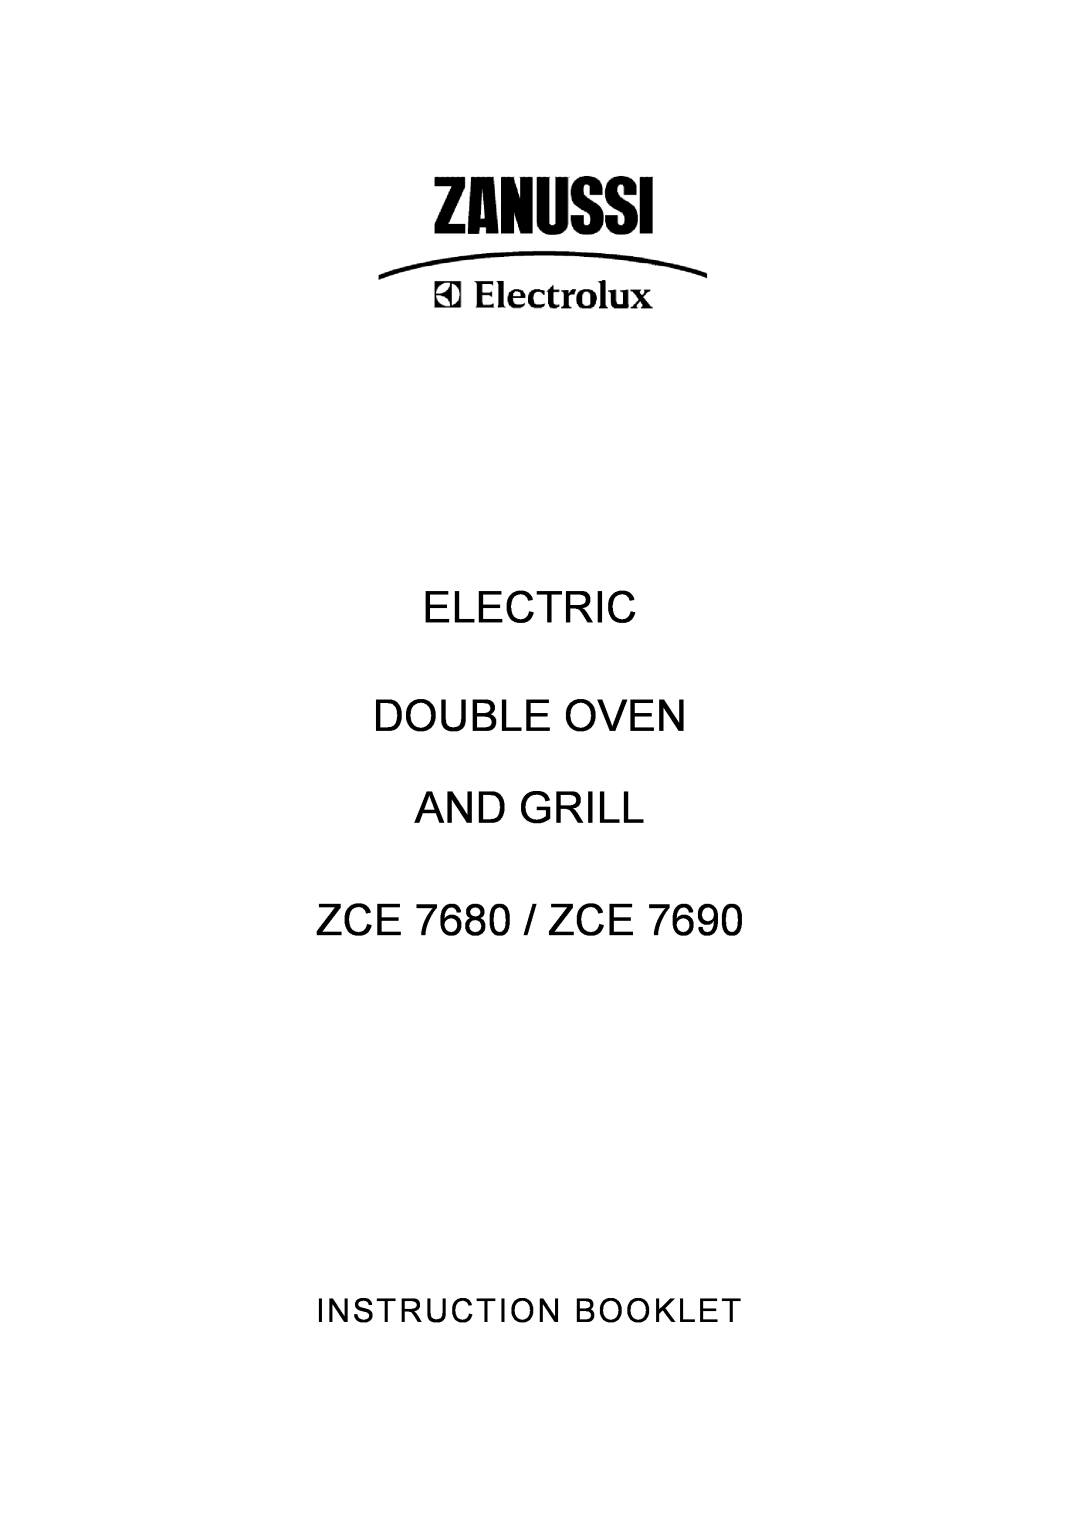 Zanussi ZCE 7690 manual ELECTRIC DOUBLE OVEN AND GRILL ZCE 7680 / ZCE, Instruction Booklet 